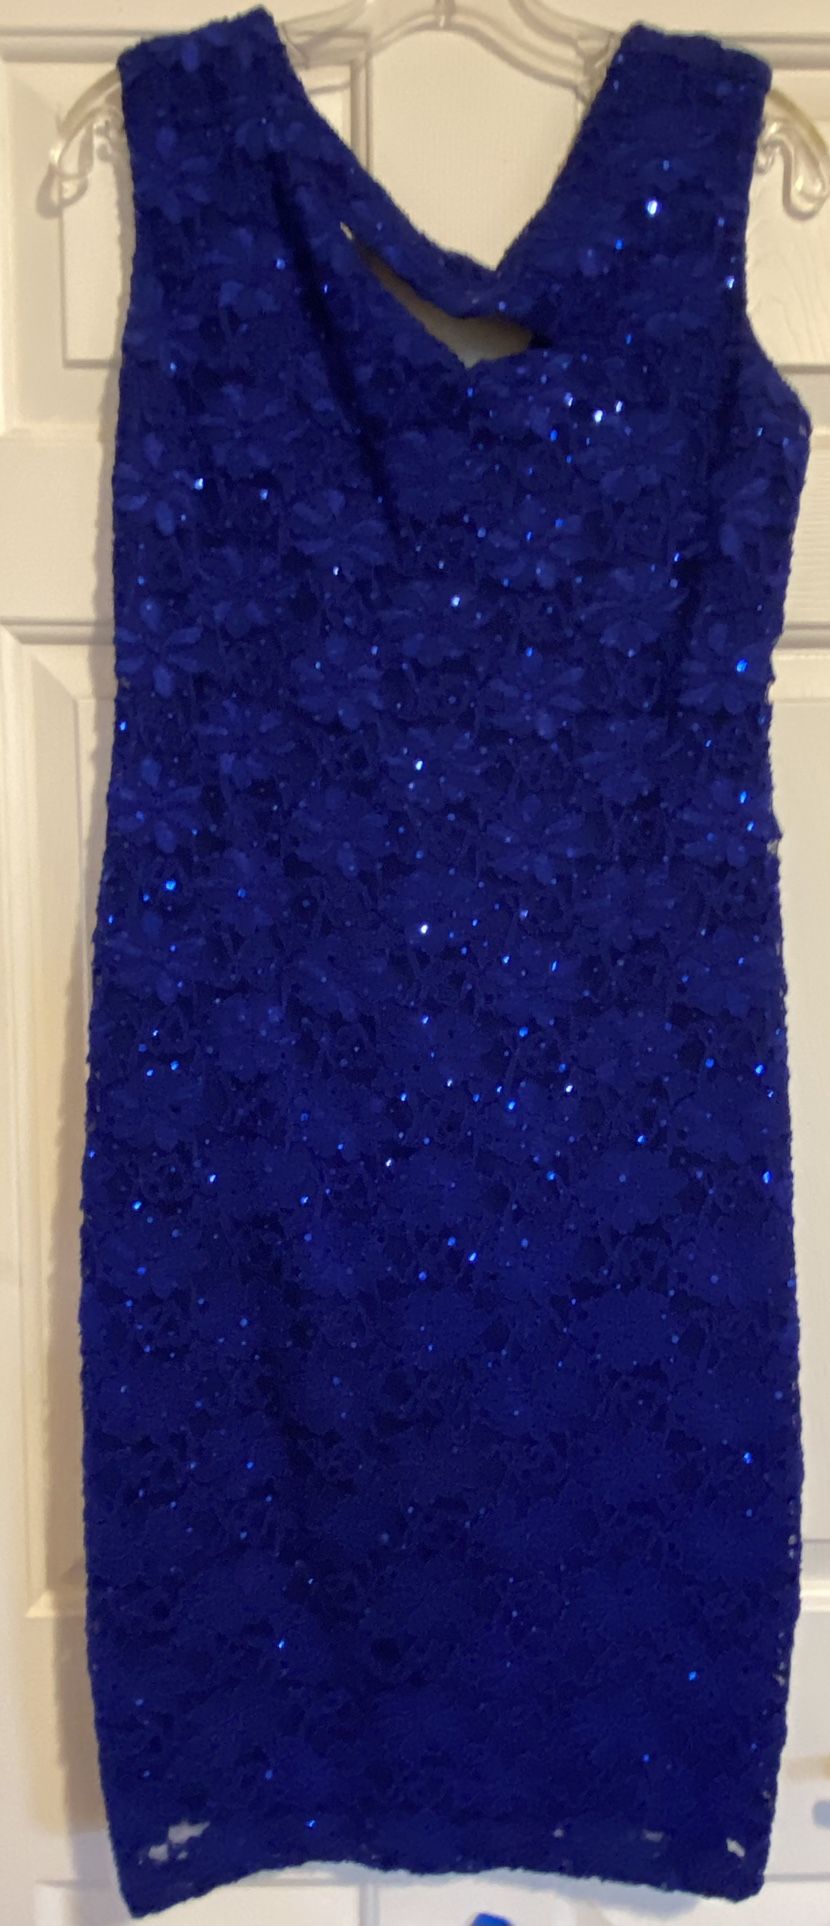 Dress Barn Holiday Sequin Blue Sheath Dress With Cutout Detail Size 14